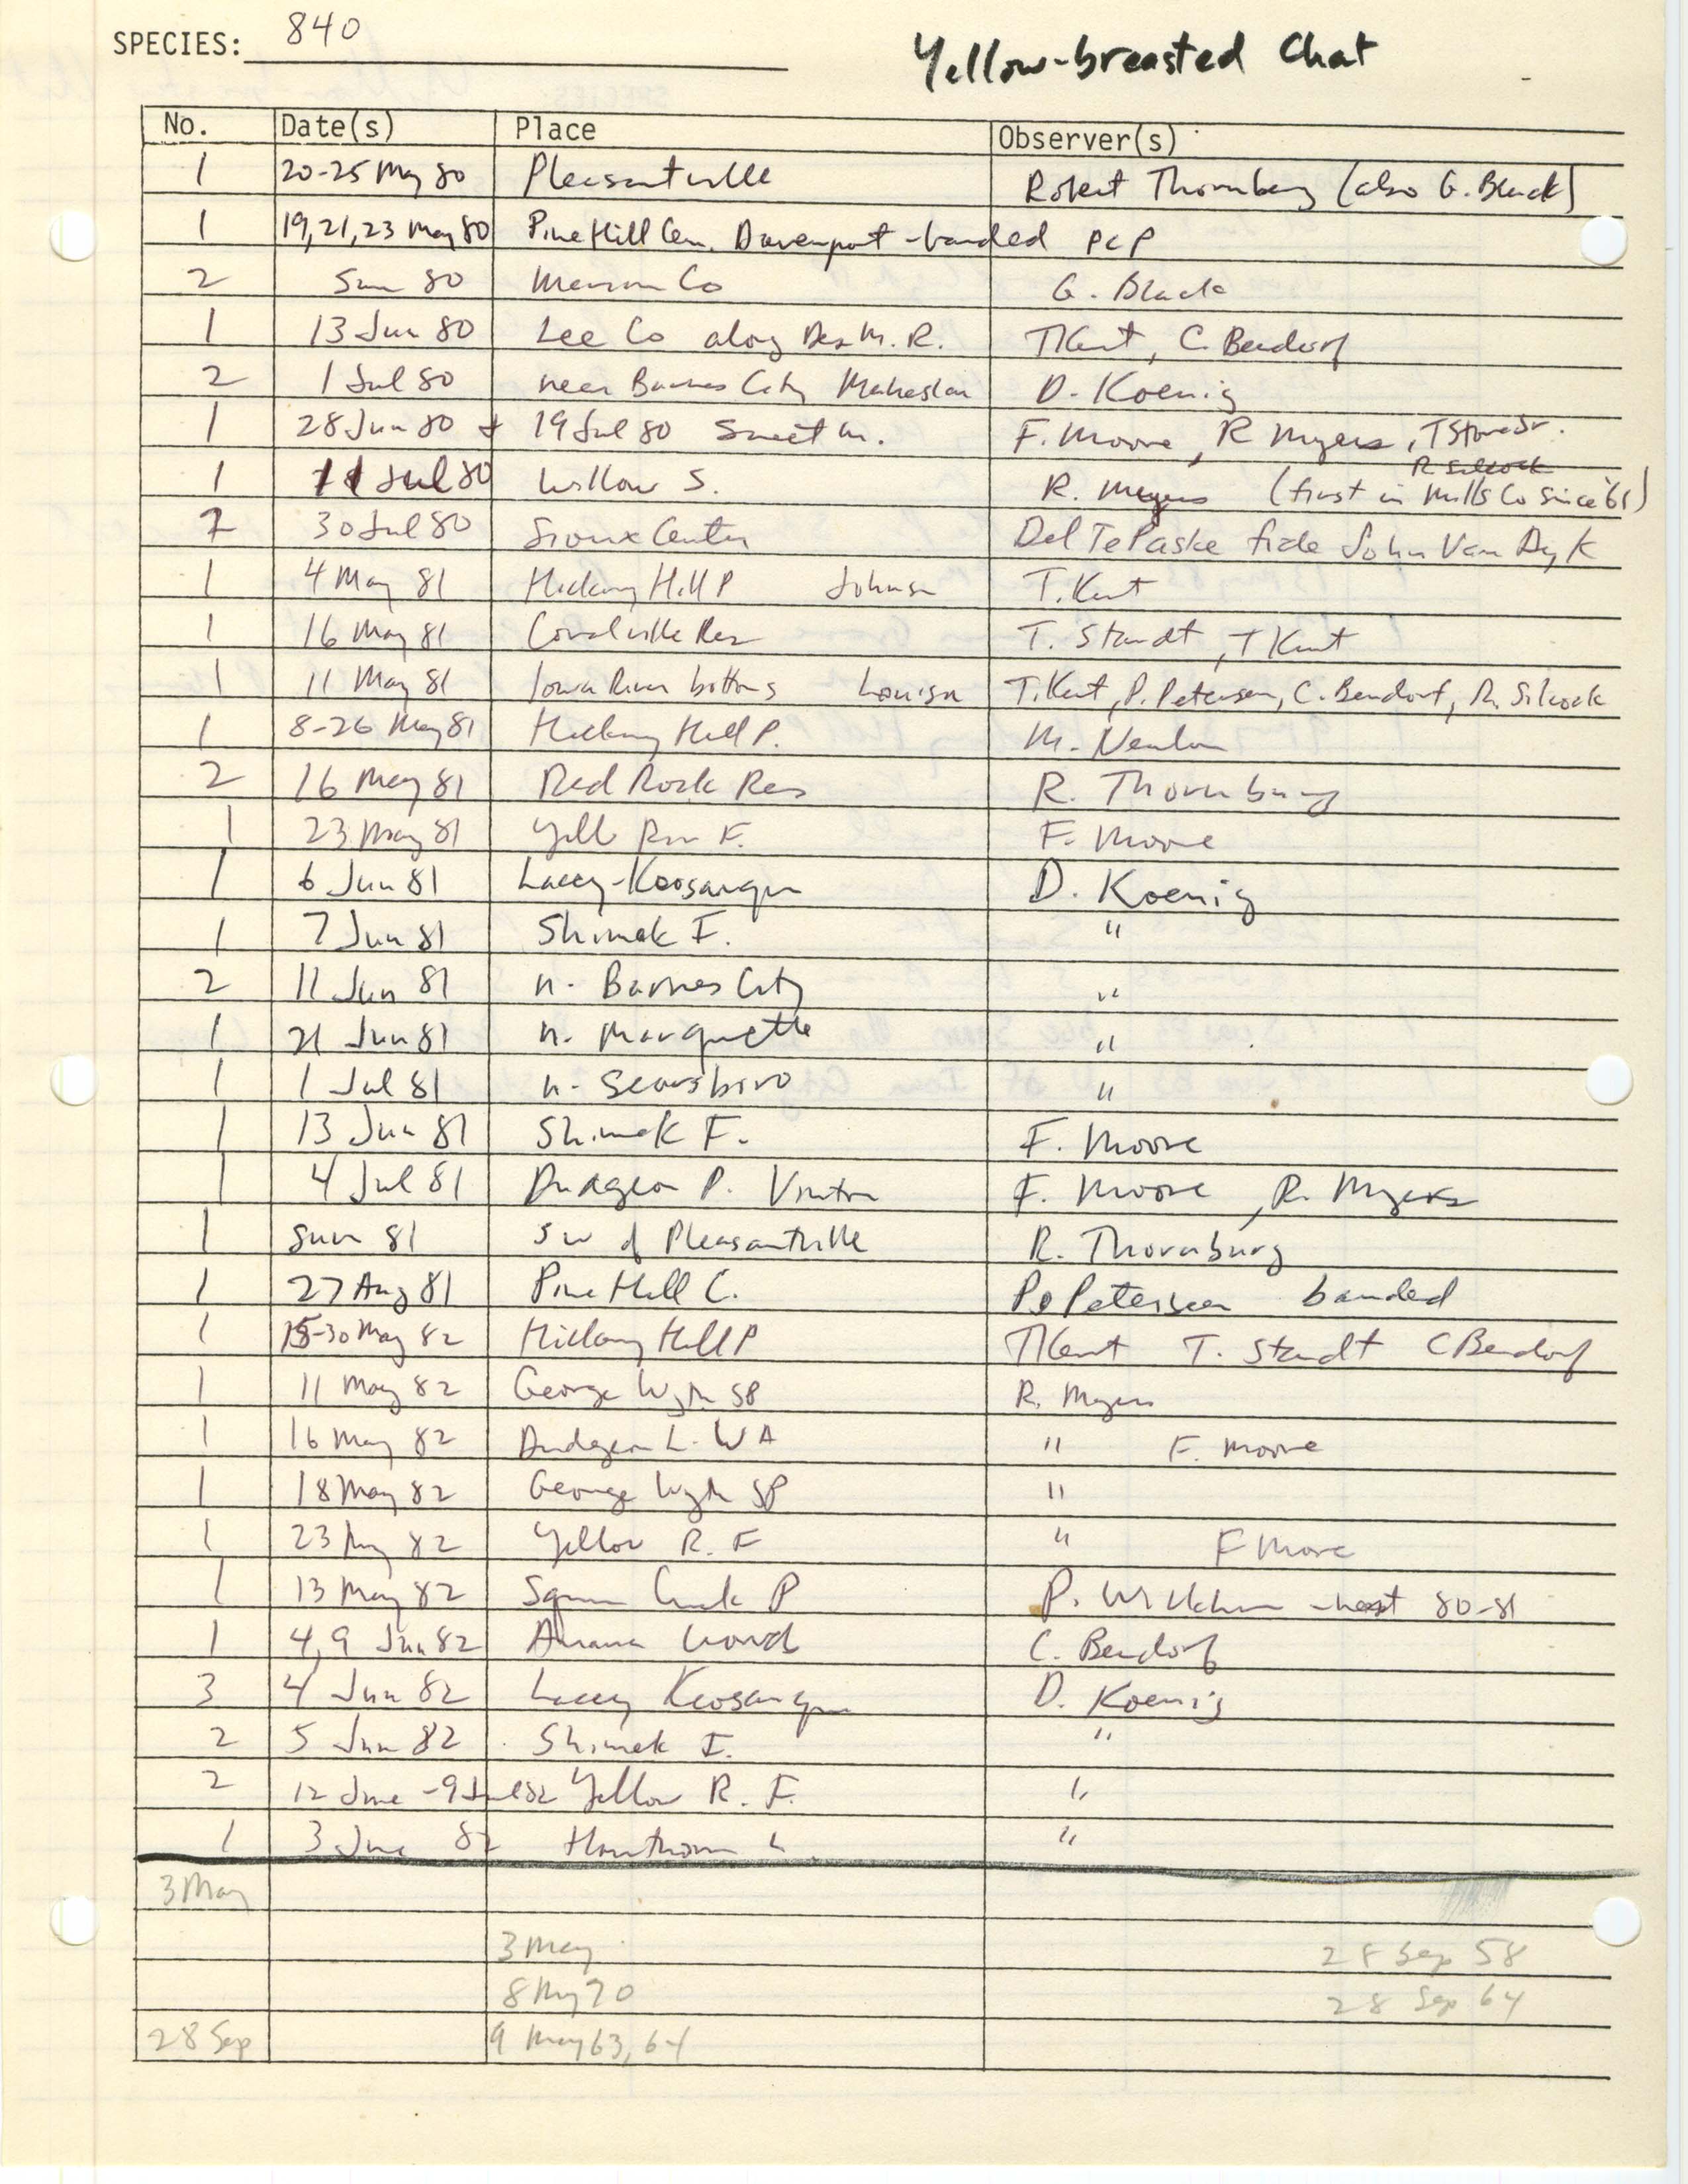 Iowa Ornithologists' Union, field report compiled data, Yellow-breasted Chat, 1958-1983